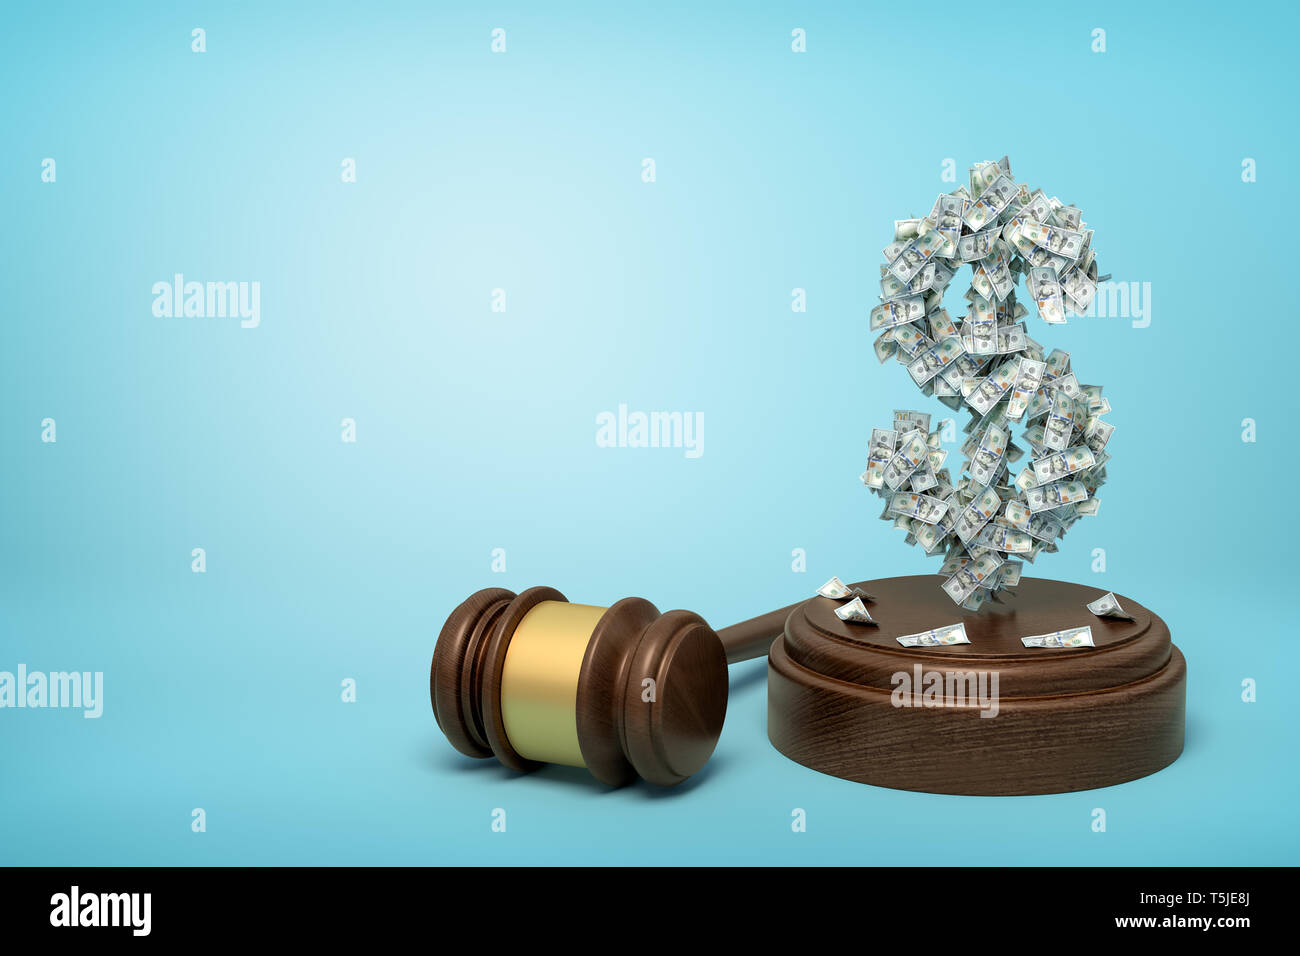 3d rendering of dollar sign formed with dollar banknotes standing on sounding block with gavel beside on blue background with copy space. Stock Photo